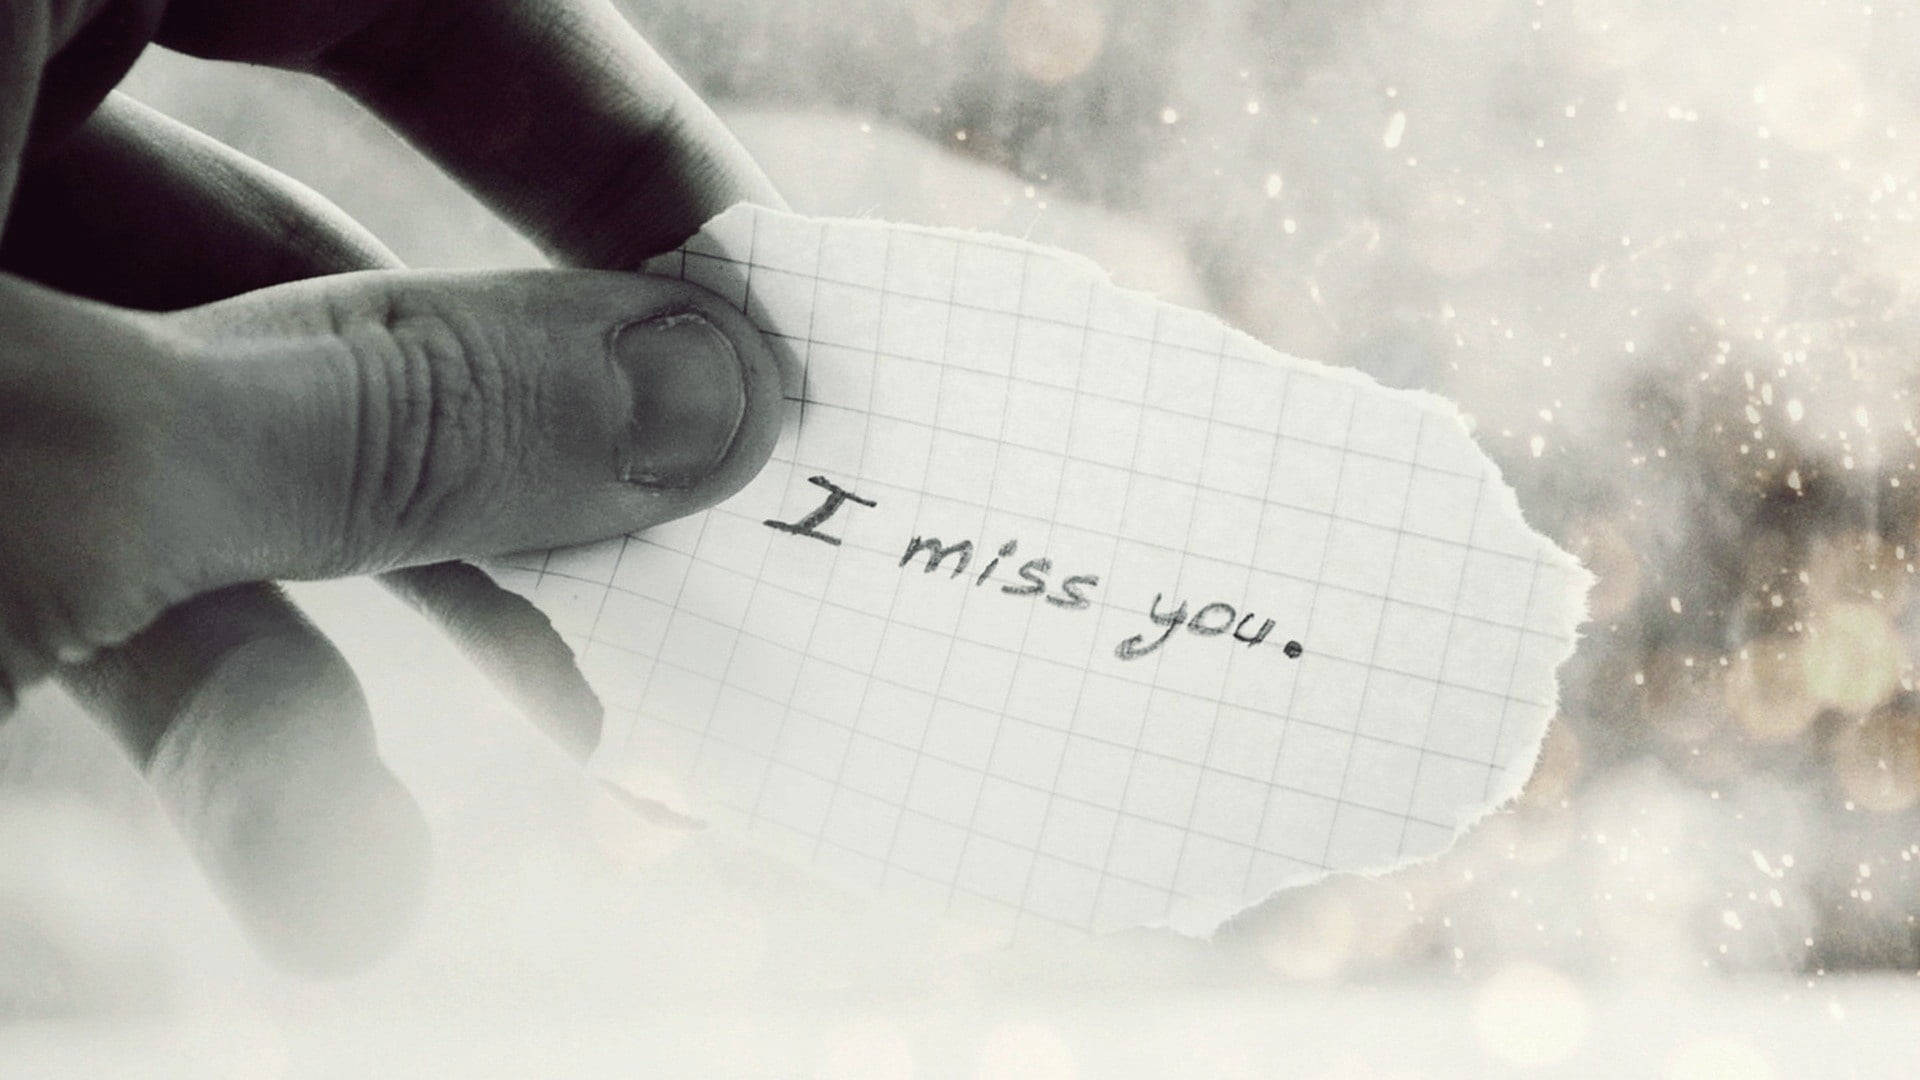 Missing You Torn Note Wallpaper